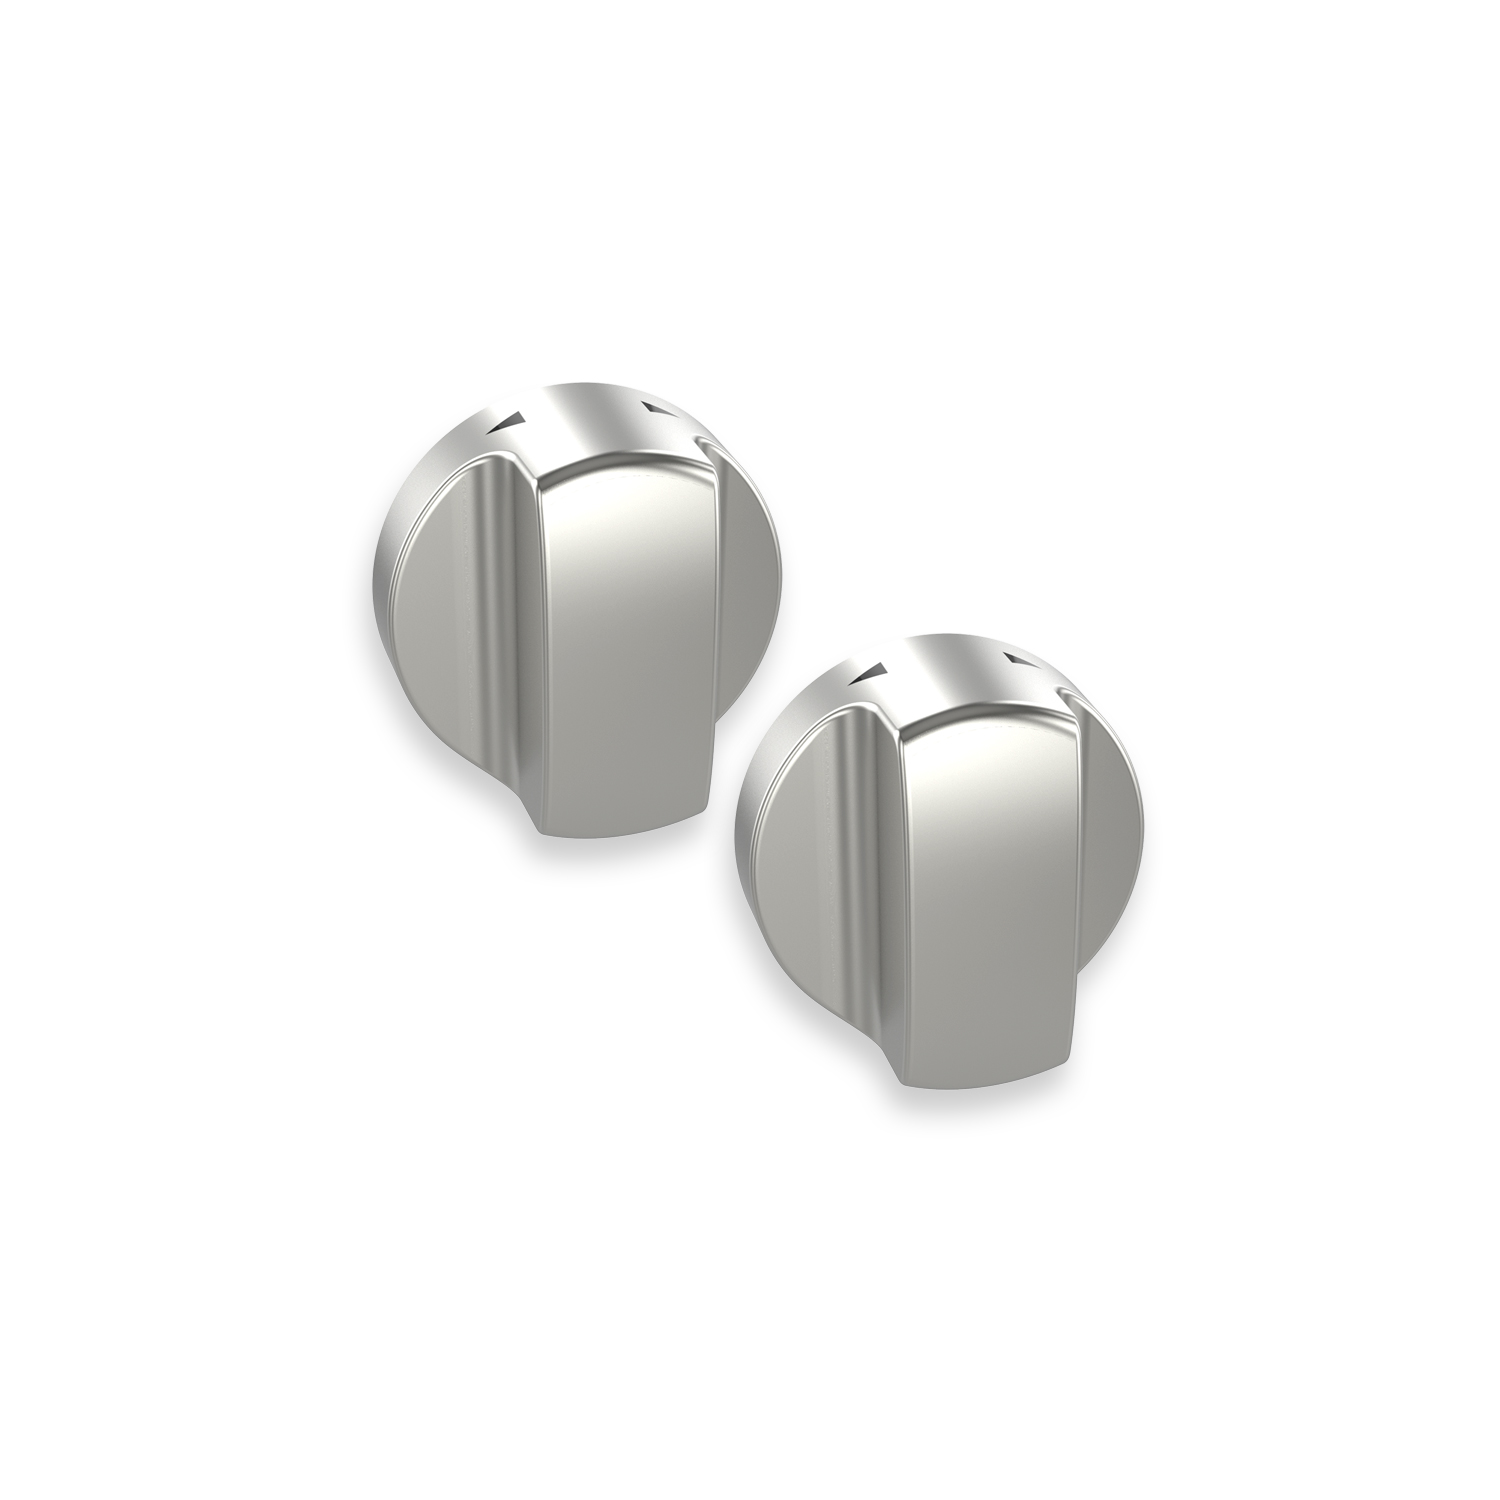 Countertop Oven Knob - Brushed Stainless